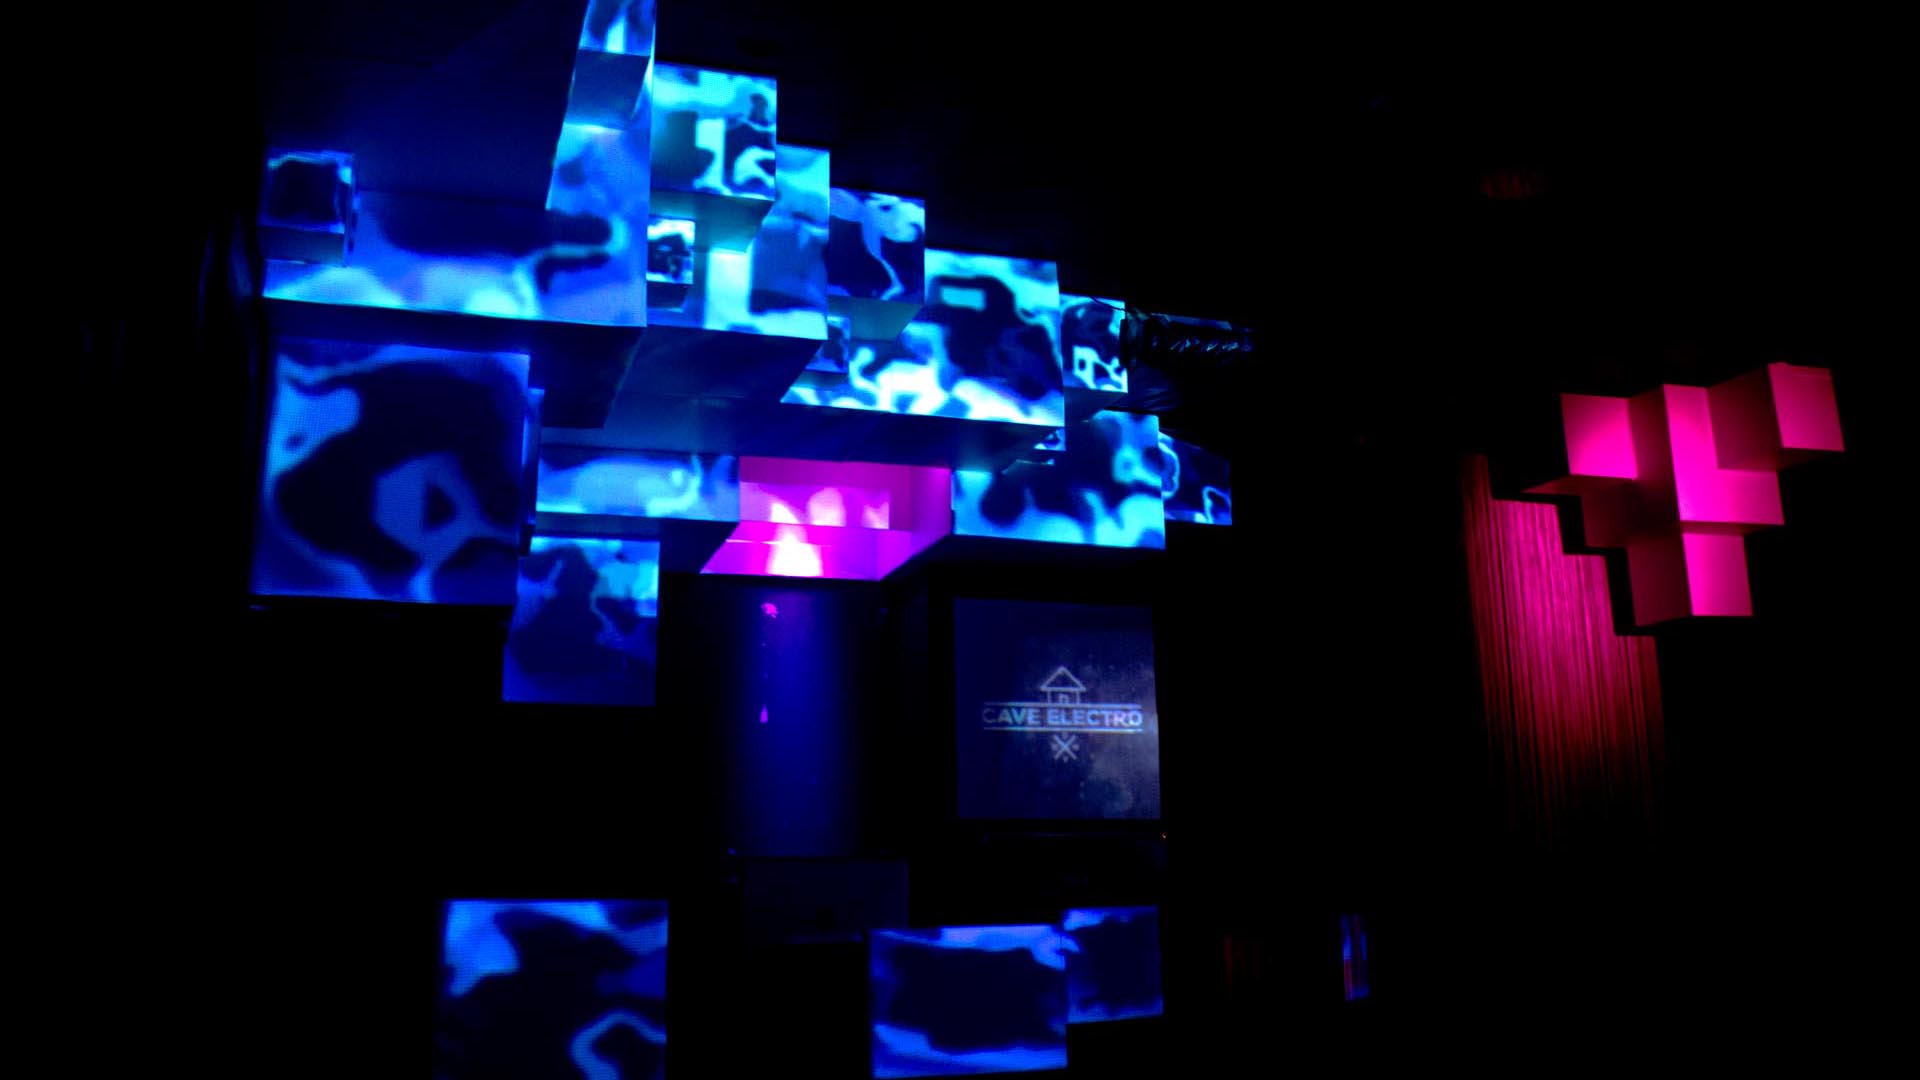 Discover innovative stage design techniques at Cave Electro, featuring permanent video mapping and visuals that dance with the music.